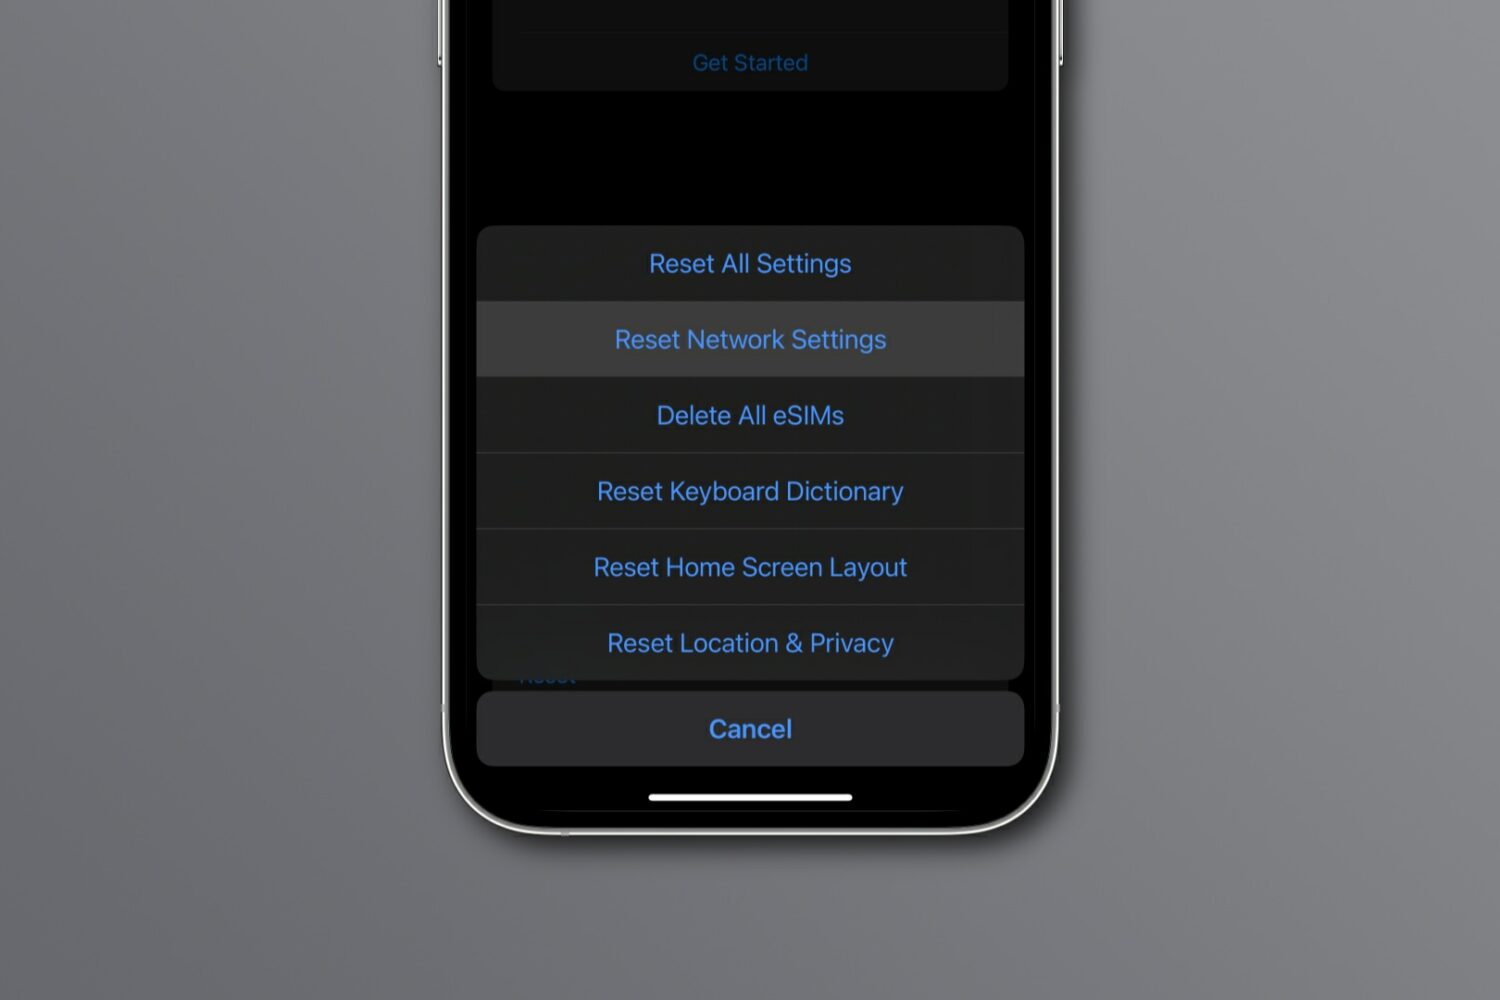 The Reset Network Settings option highlighted in the iPhone's Settings app